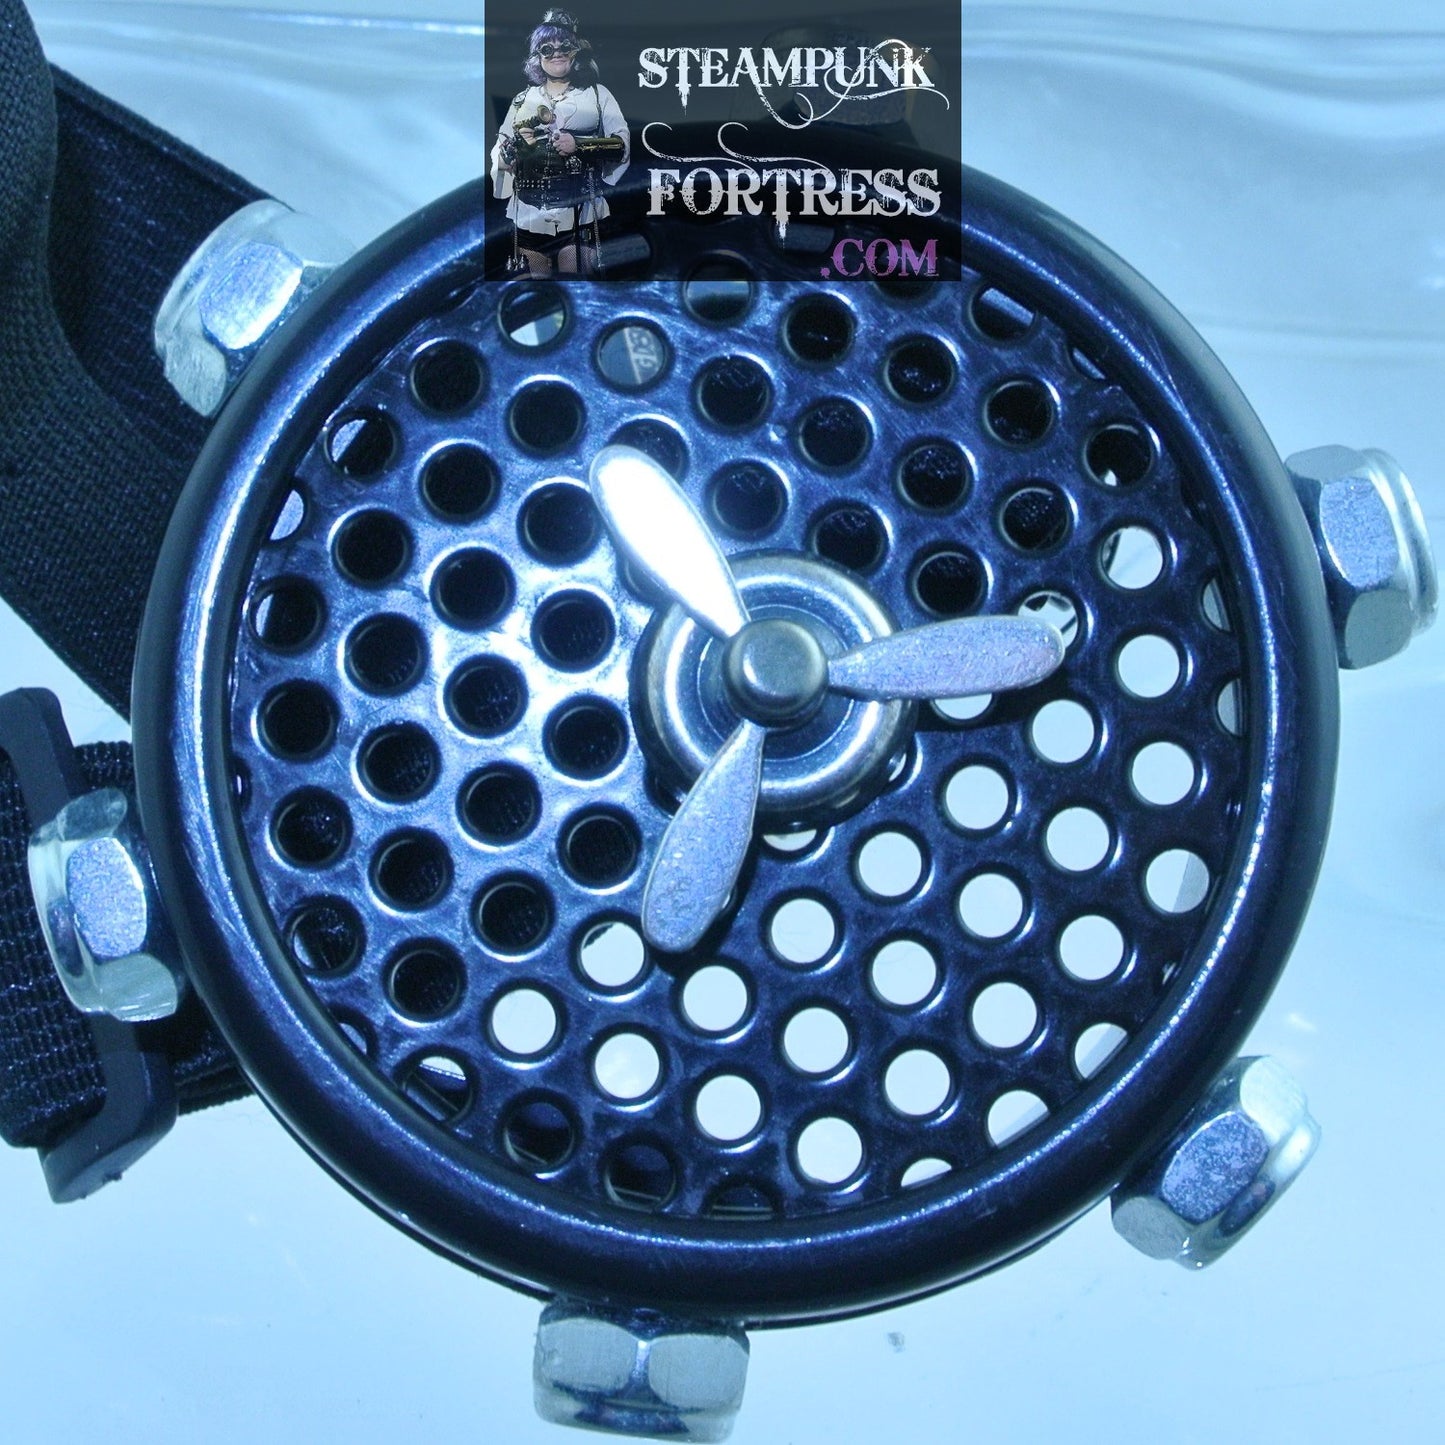 MONOCLE BLACK MESH INSERT SILVER KINETIC SPINS SPINNING PROPELLER STUDDED GOGGLES STARR WILDE STEAMPUNK FORTRESS